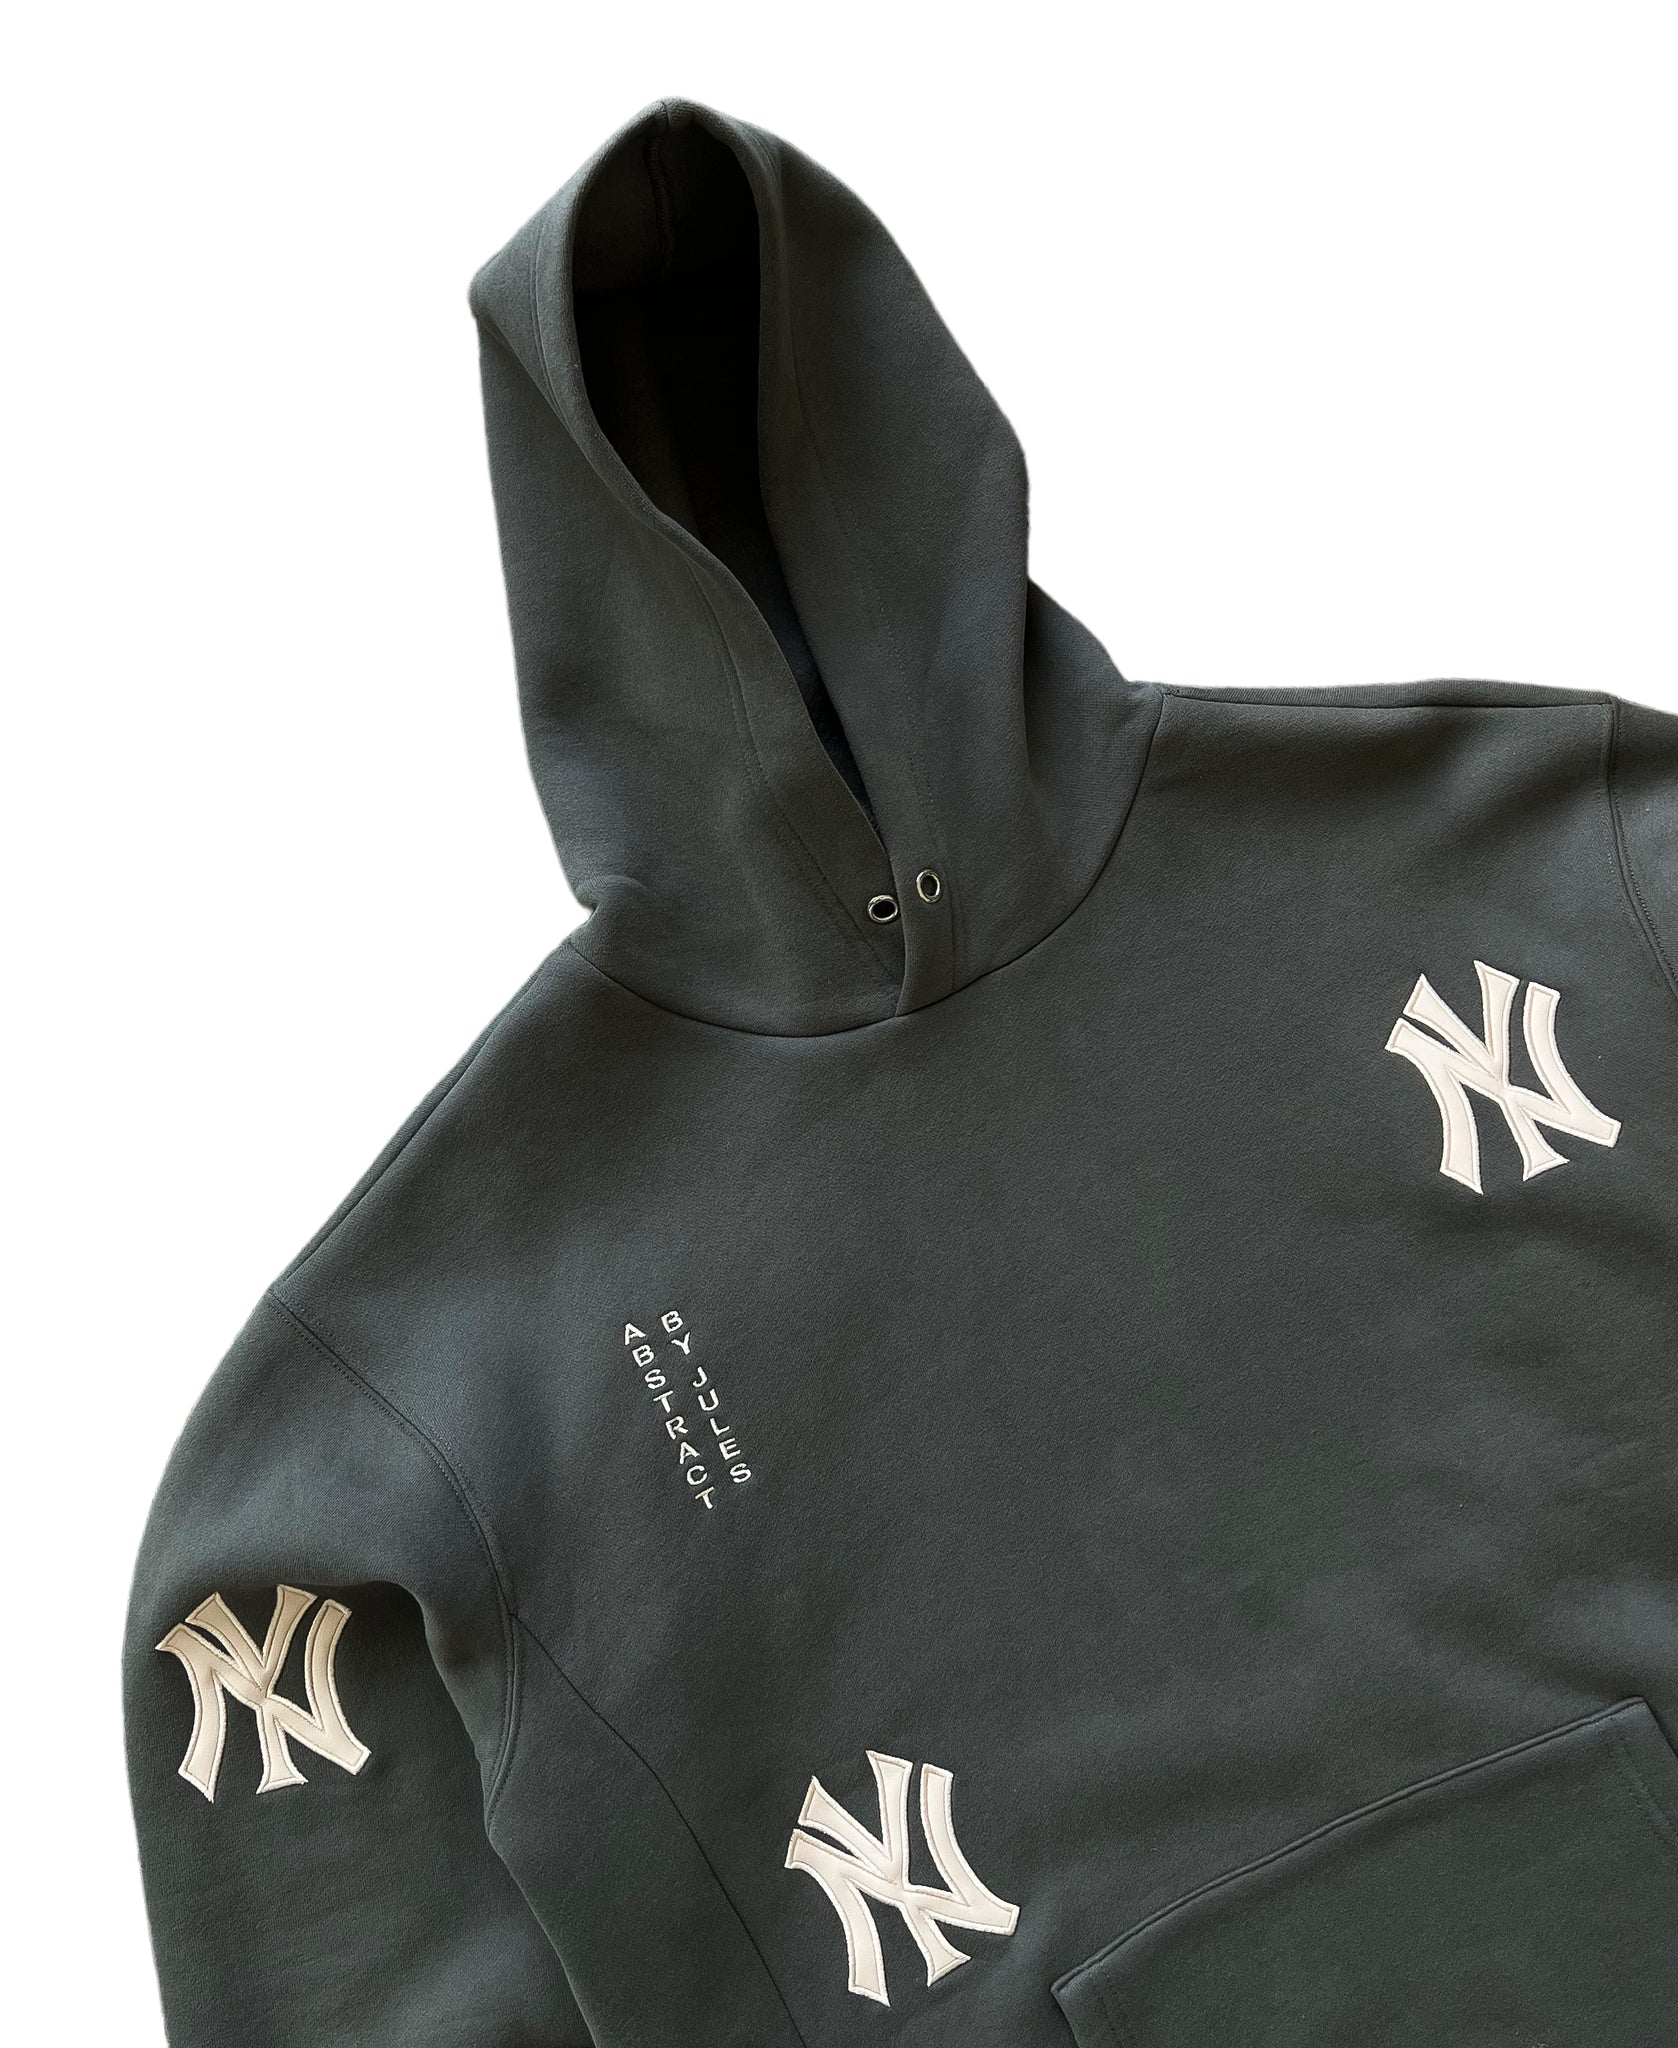 NY Patch Hoodie - Stone